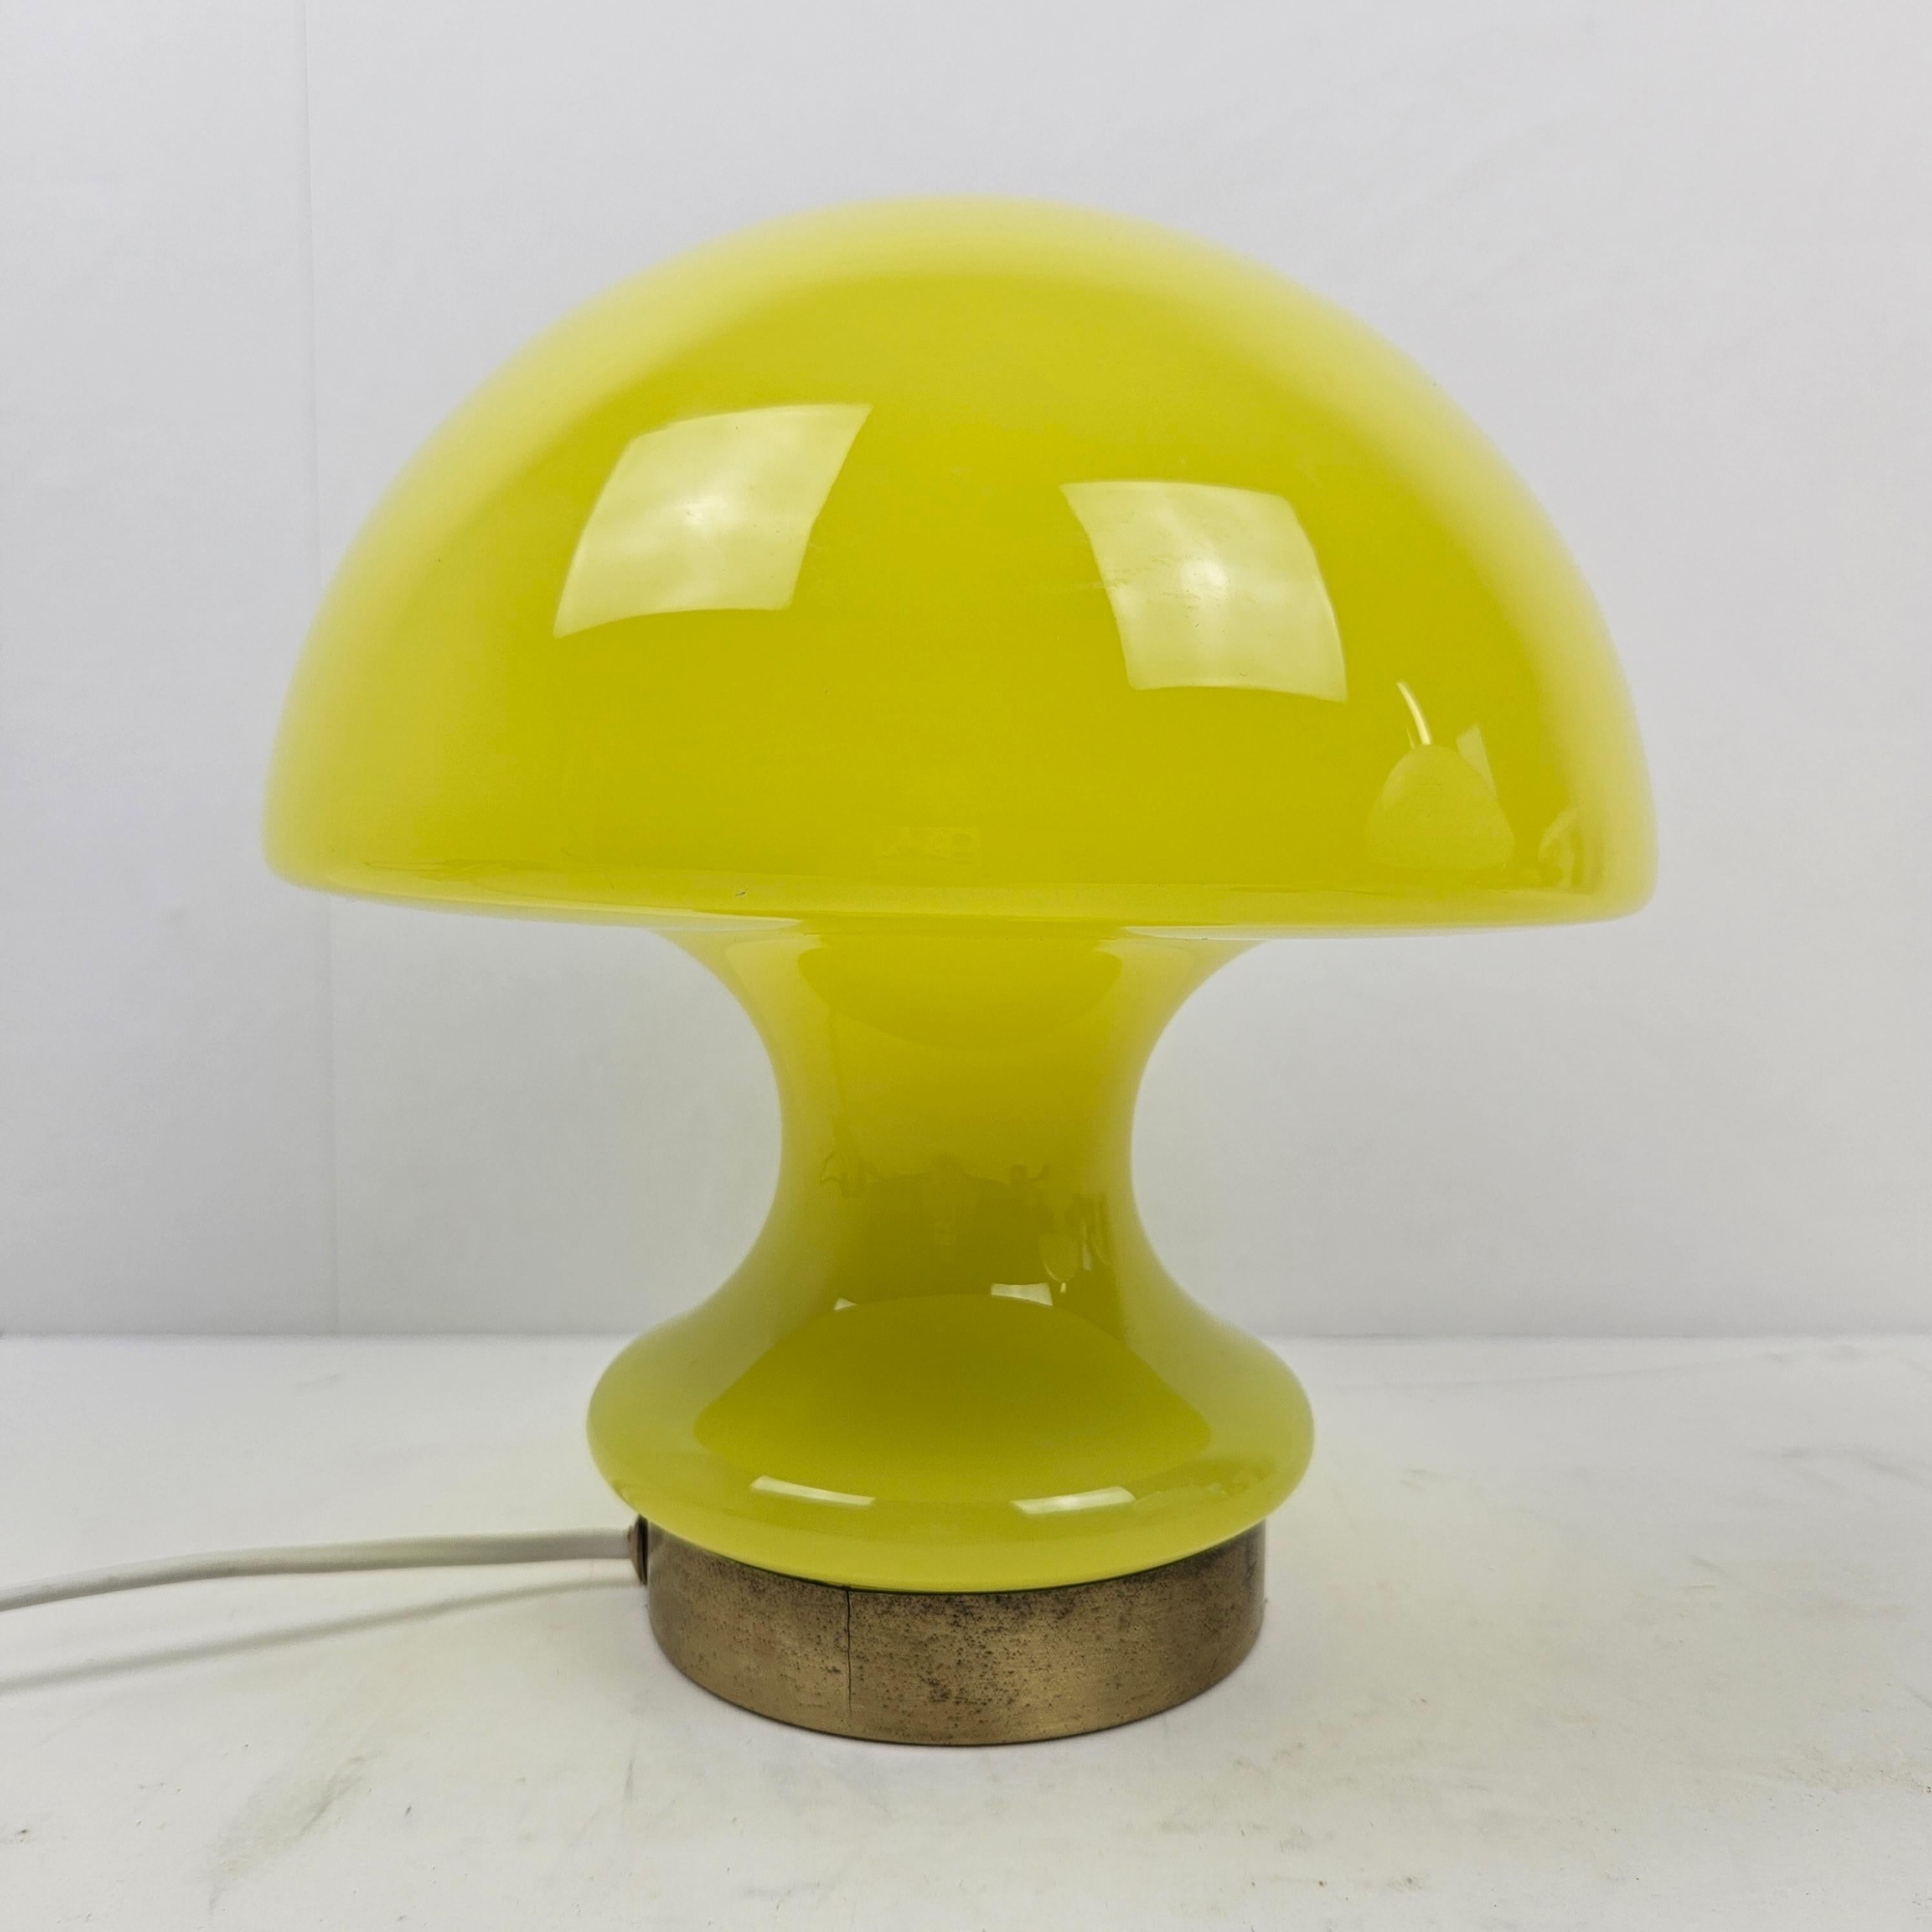 Very nice table lamp, fabricated in Italy in the 70's.

The elegant shape makes it look like a mushroom.
The combination with the yellow glass and the brass gives a stunning effect.

Some normal traces of use, see the pictures.

The wiring has been